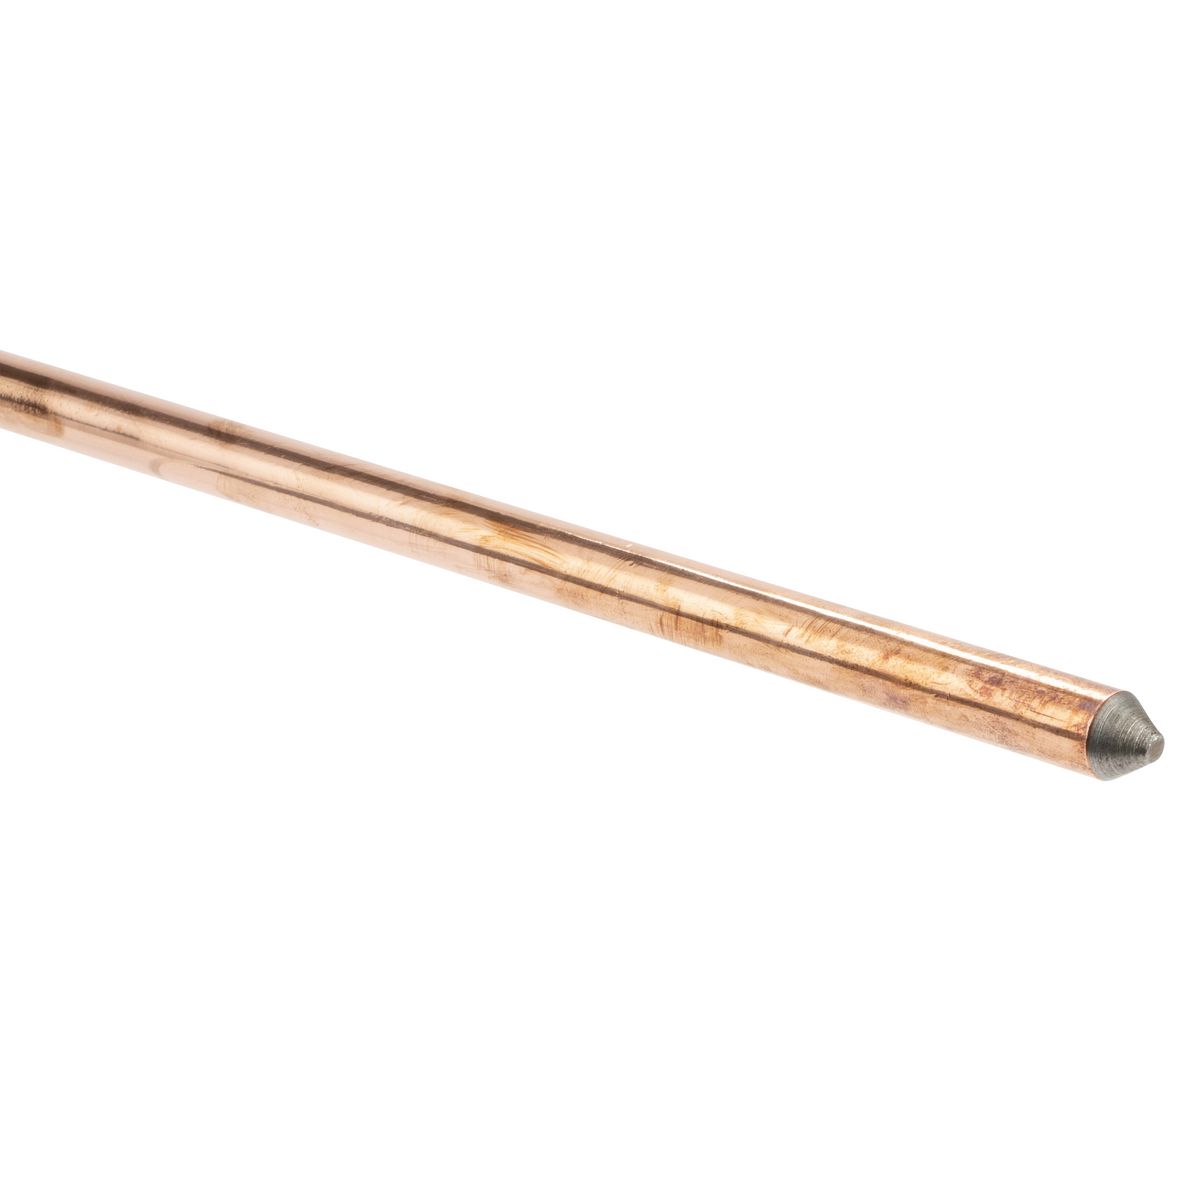 10mil COPPER-BONDED GROUND ROD, 3/4in x 6ft, UNTHREADED ENDS